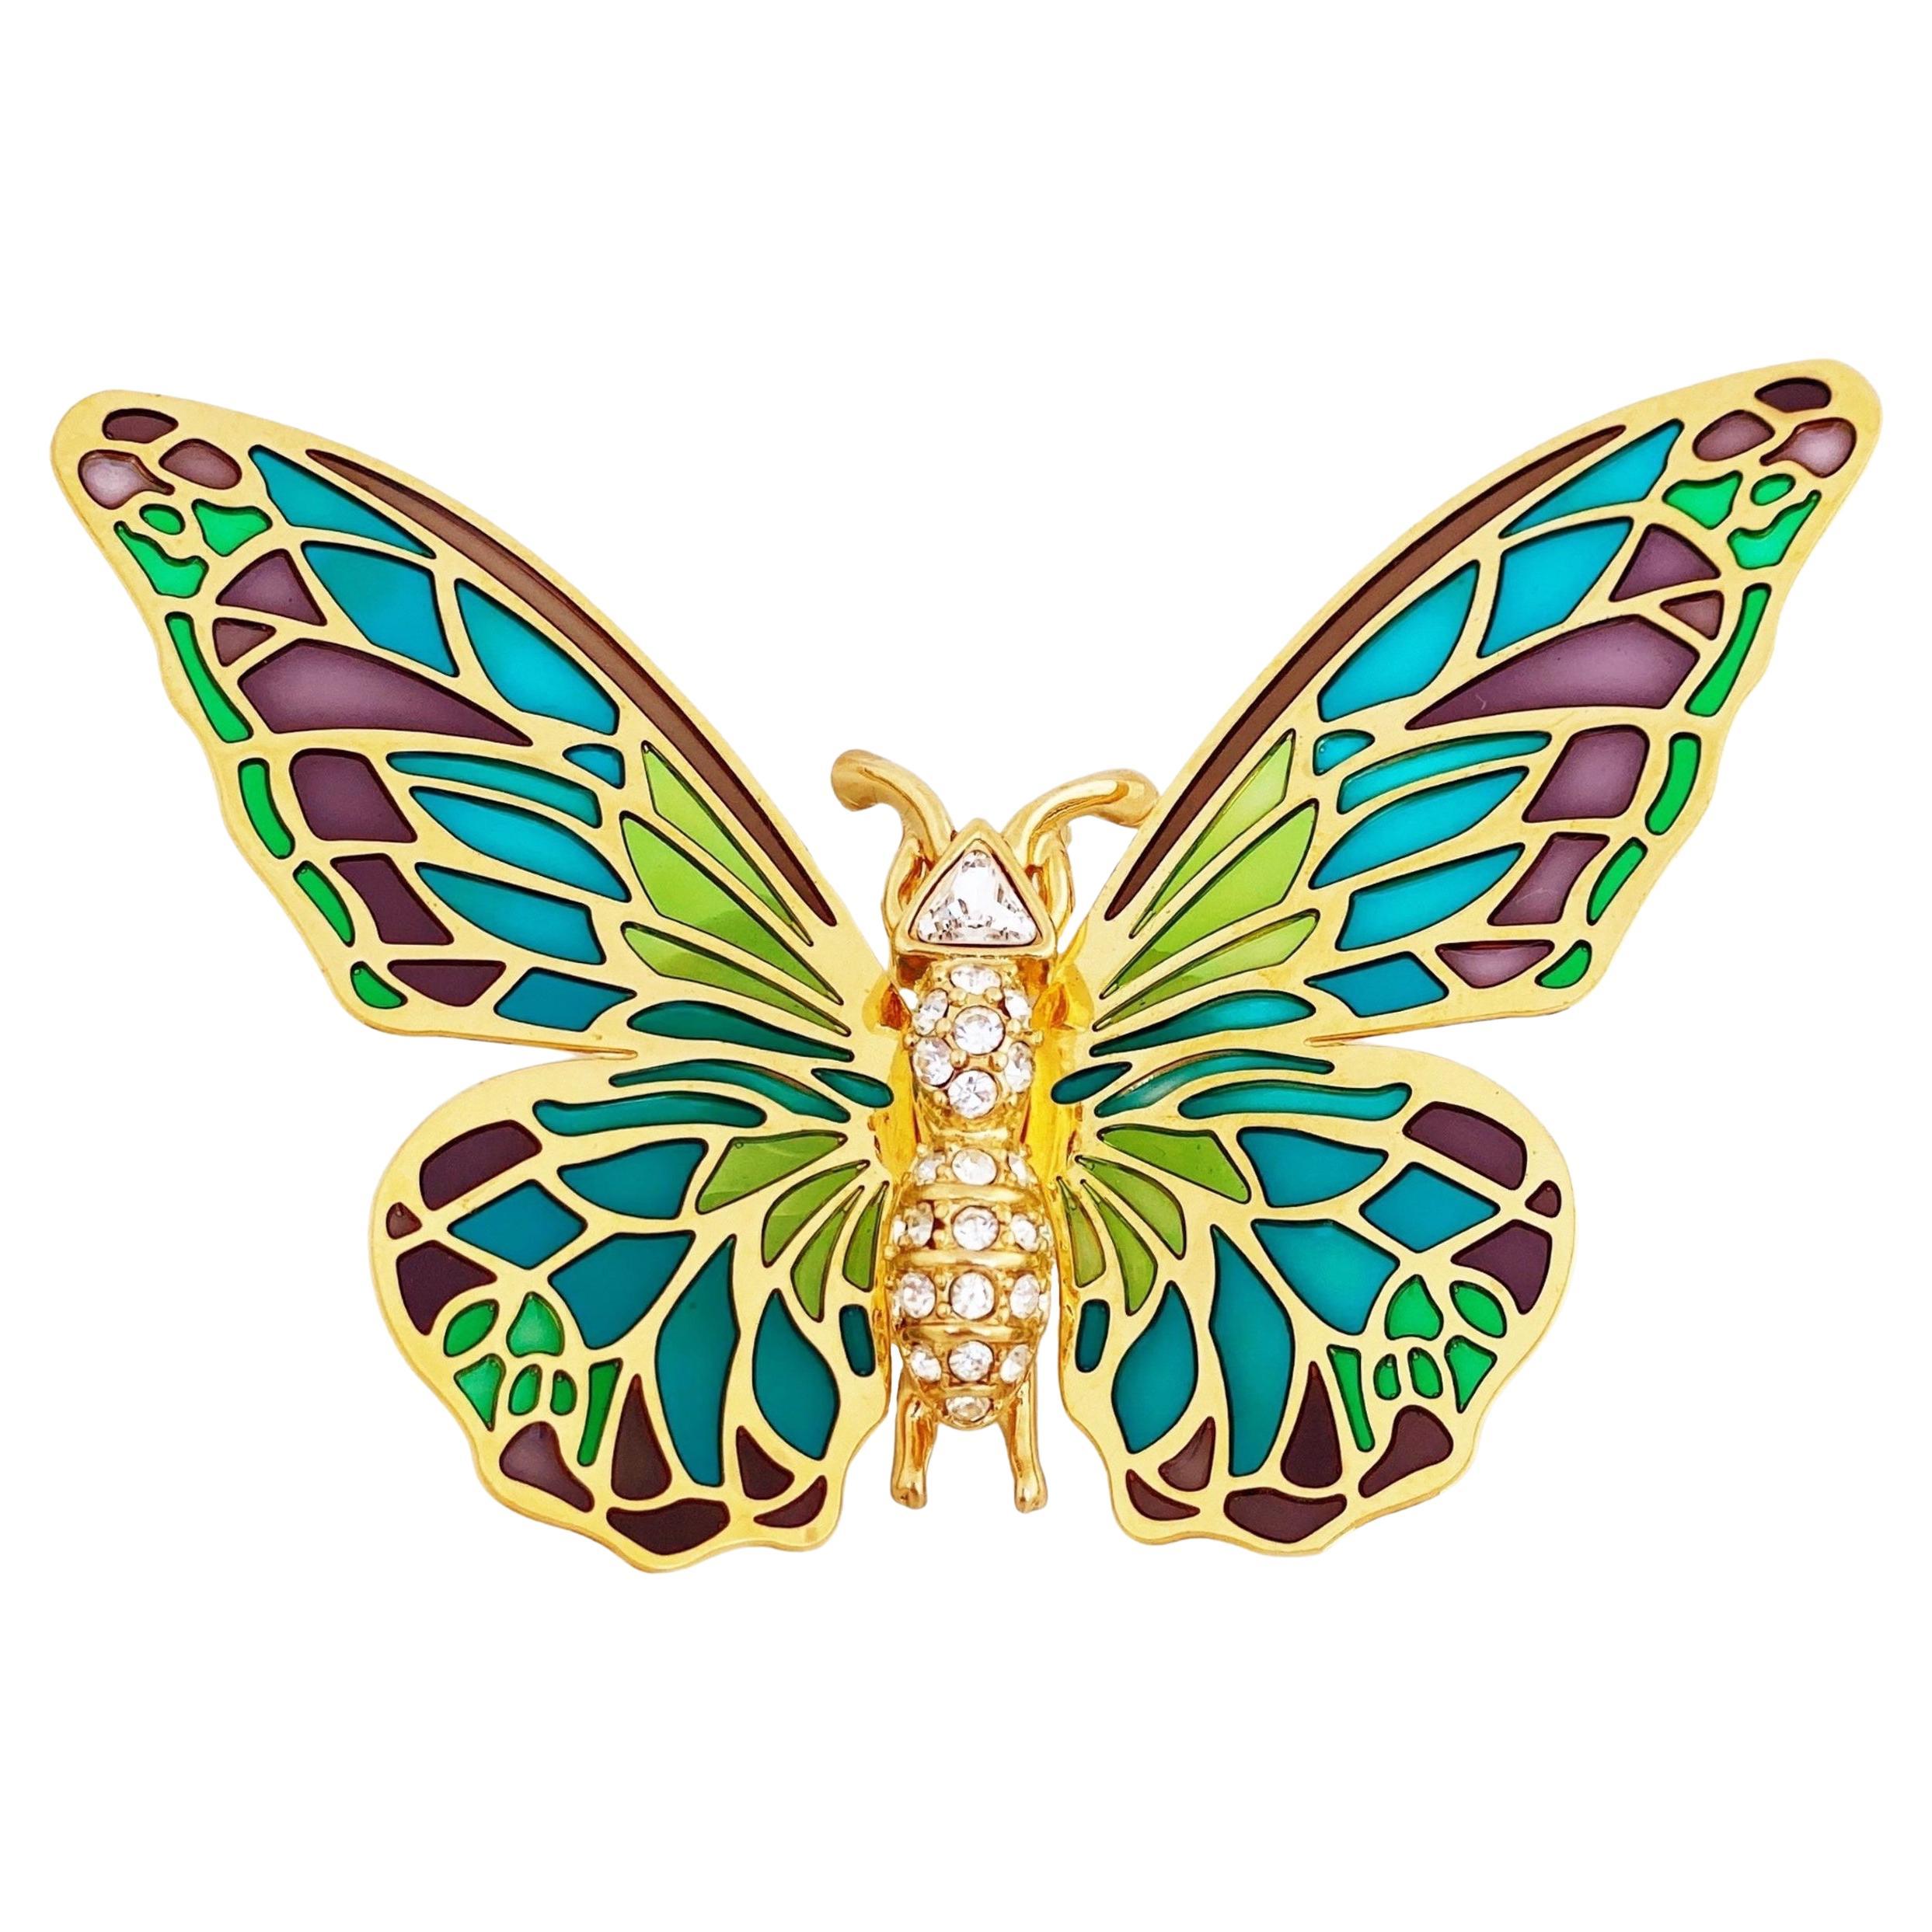 Plique-à-Jour Stained Glass Butterfly Figural Brooch By Nolan Miller, 1980s For Sale